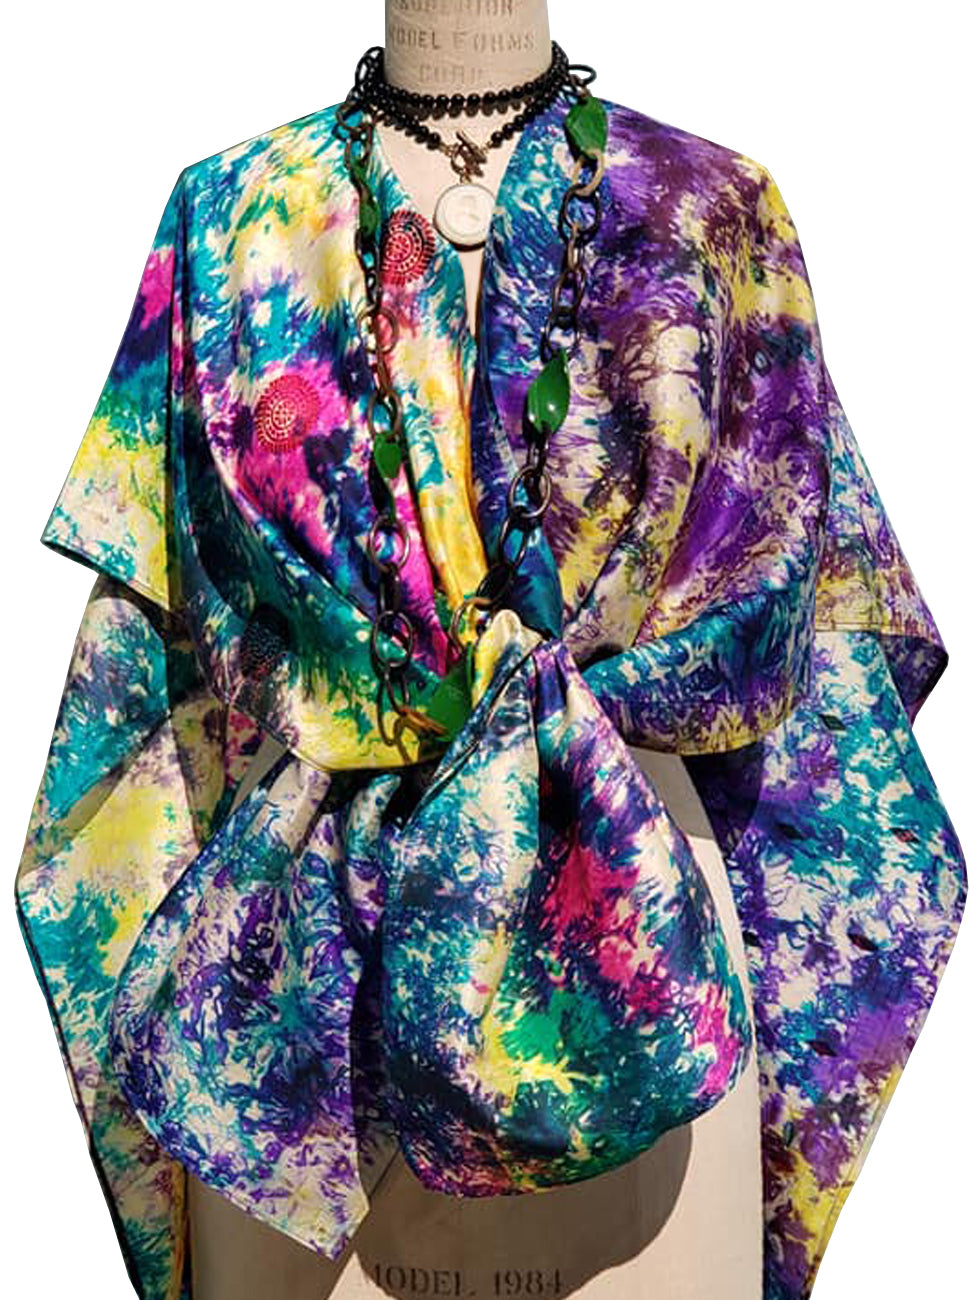 Silk Cape Almost Famous Collection - Jackson Pollock